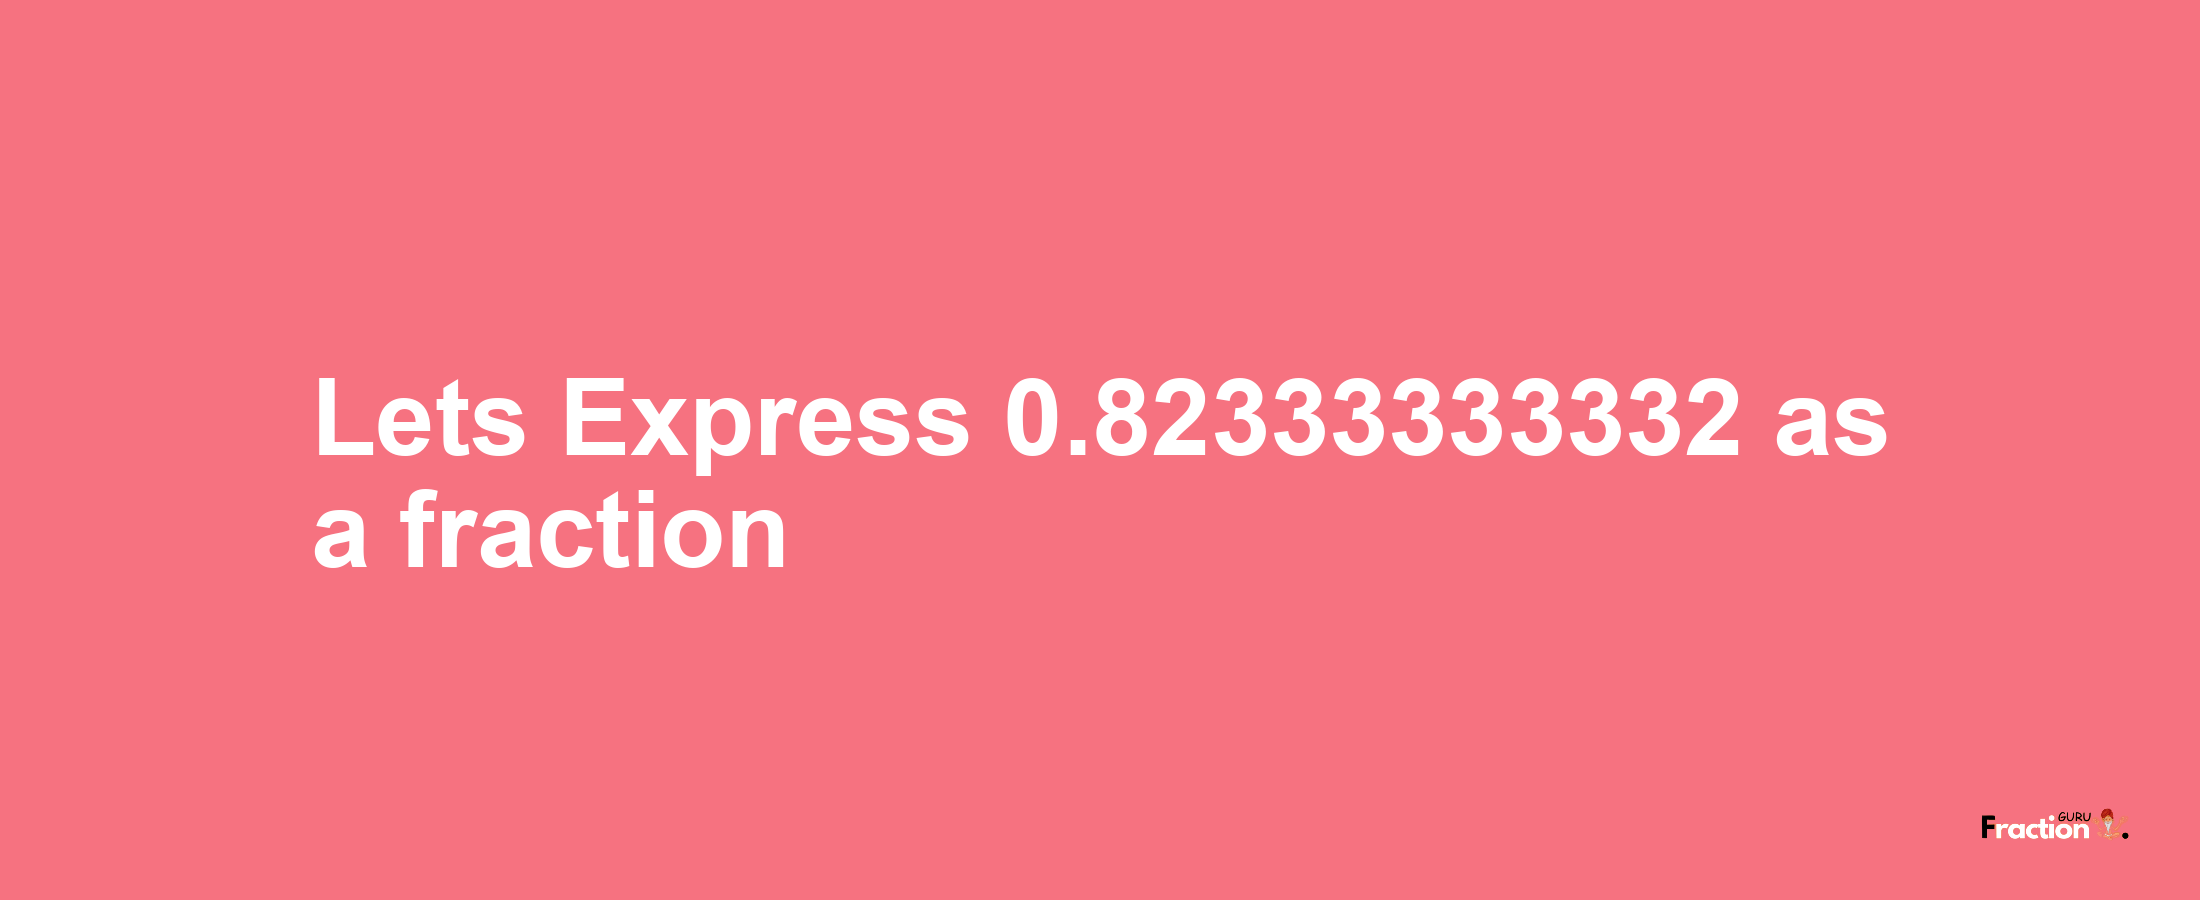 Lets Express 0.82333333332 as afraction